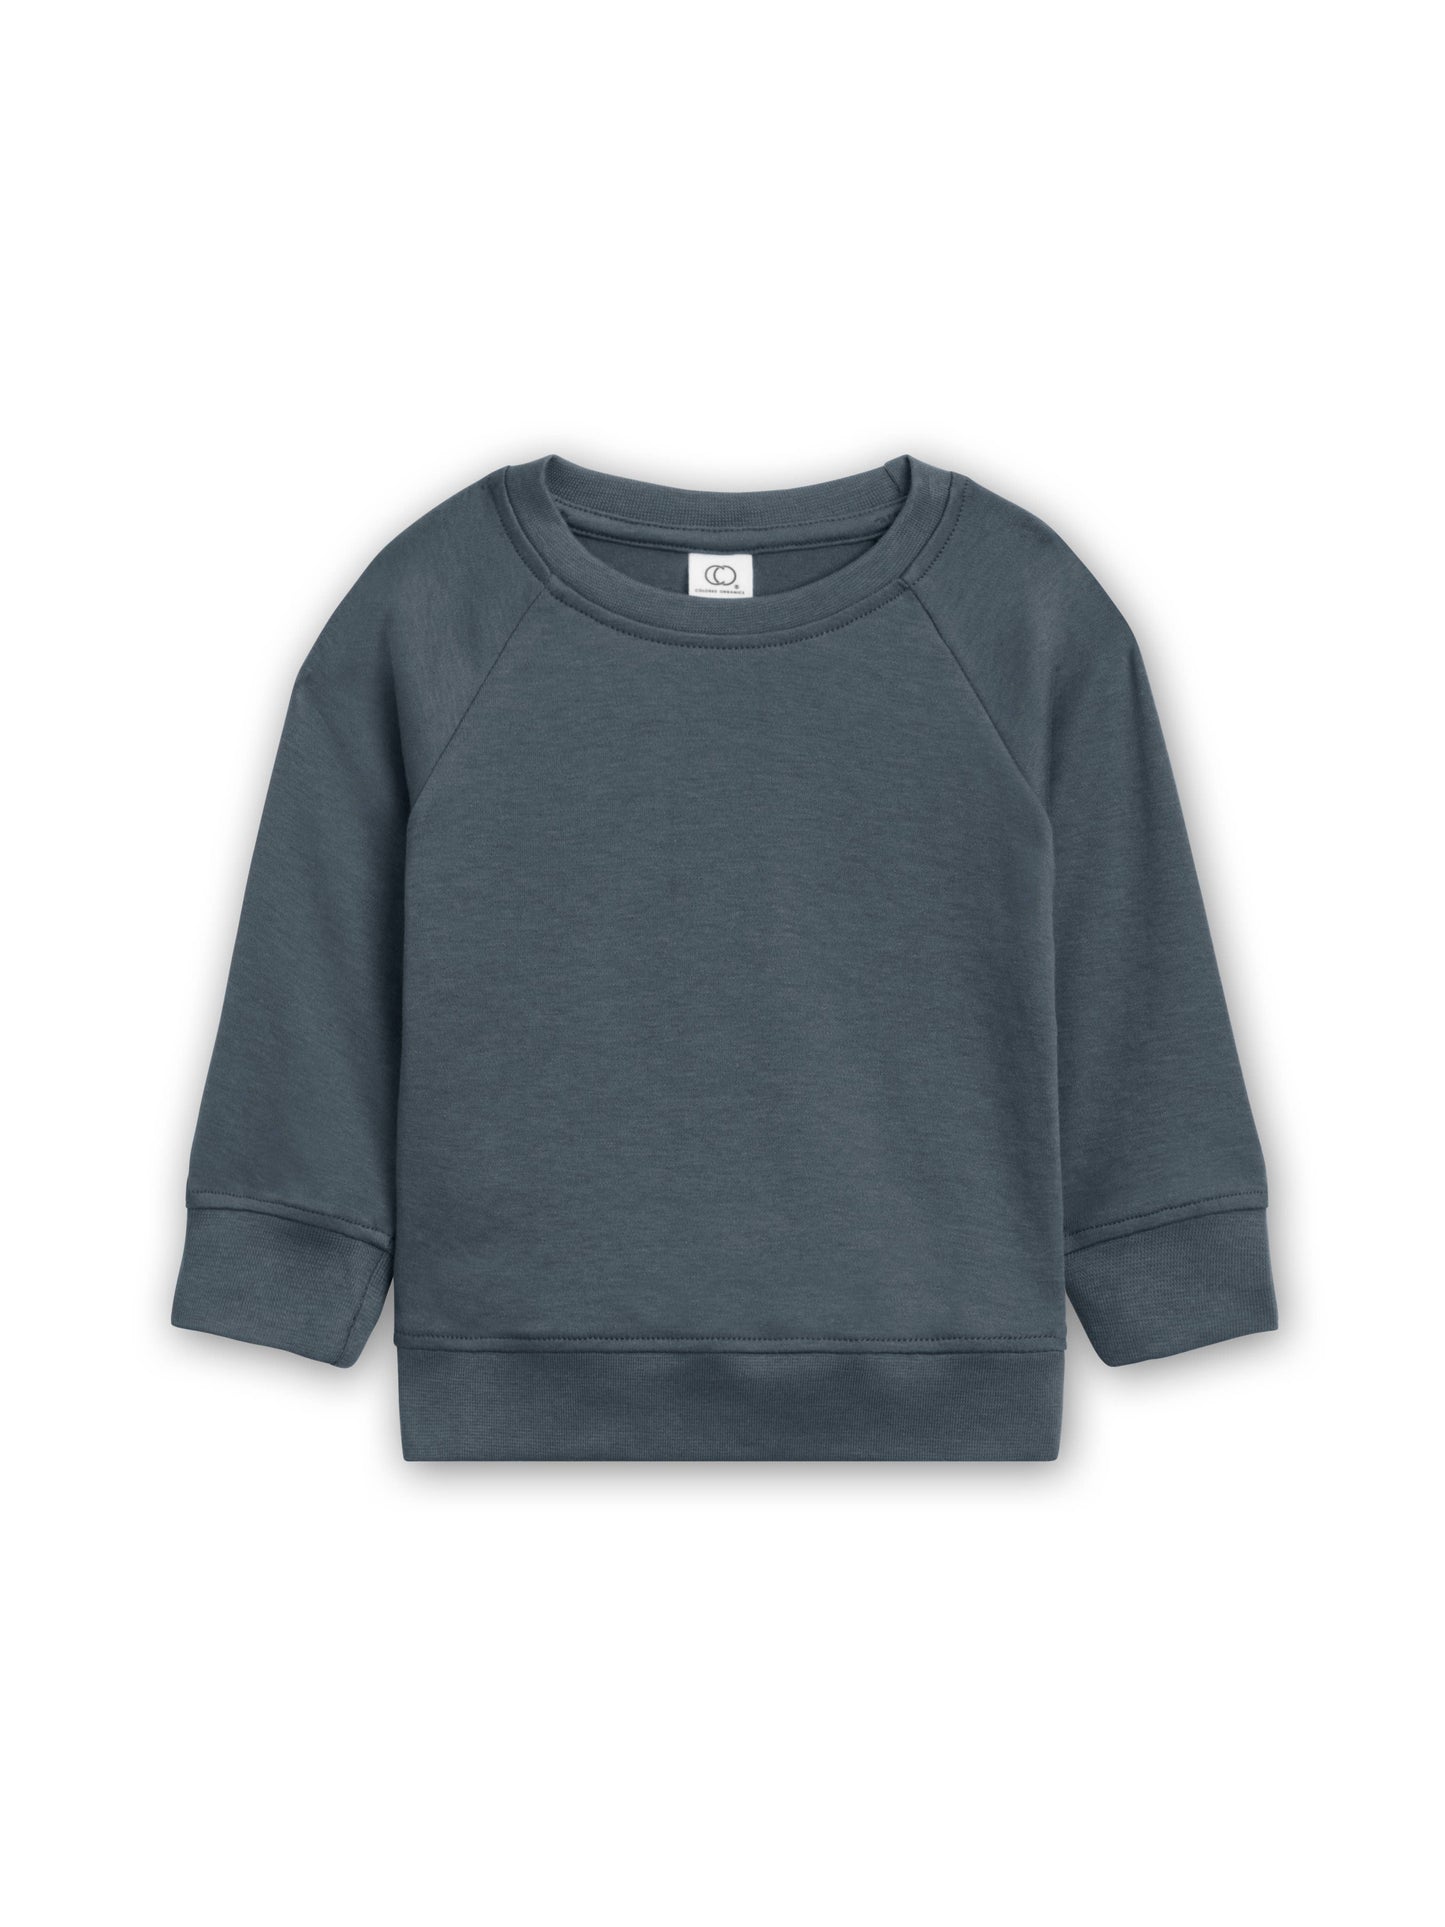 Colored Organics - Organic Baby and Kids Portland Pullover - Harbor